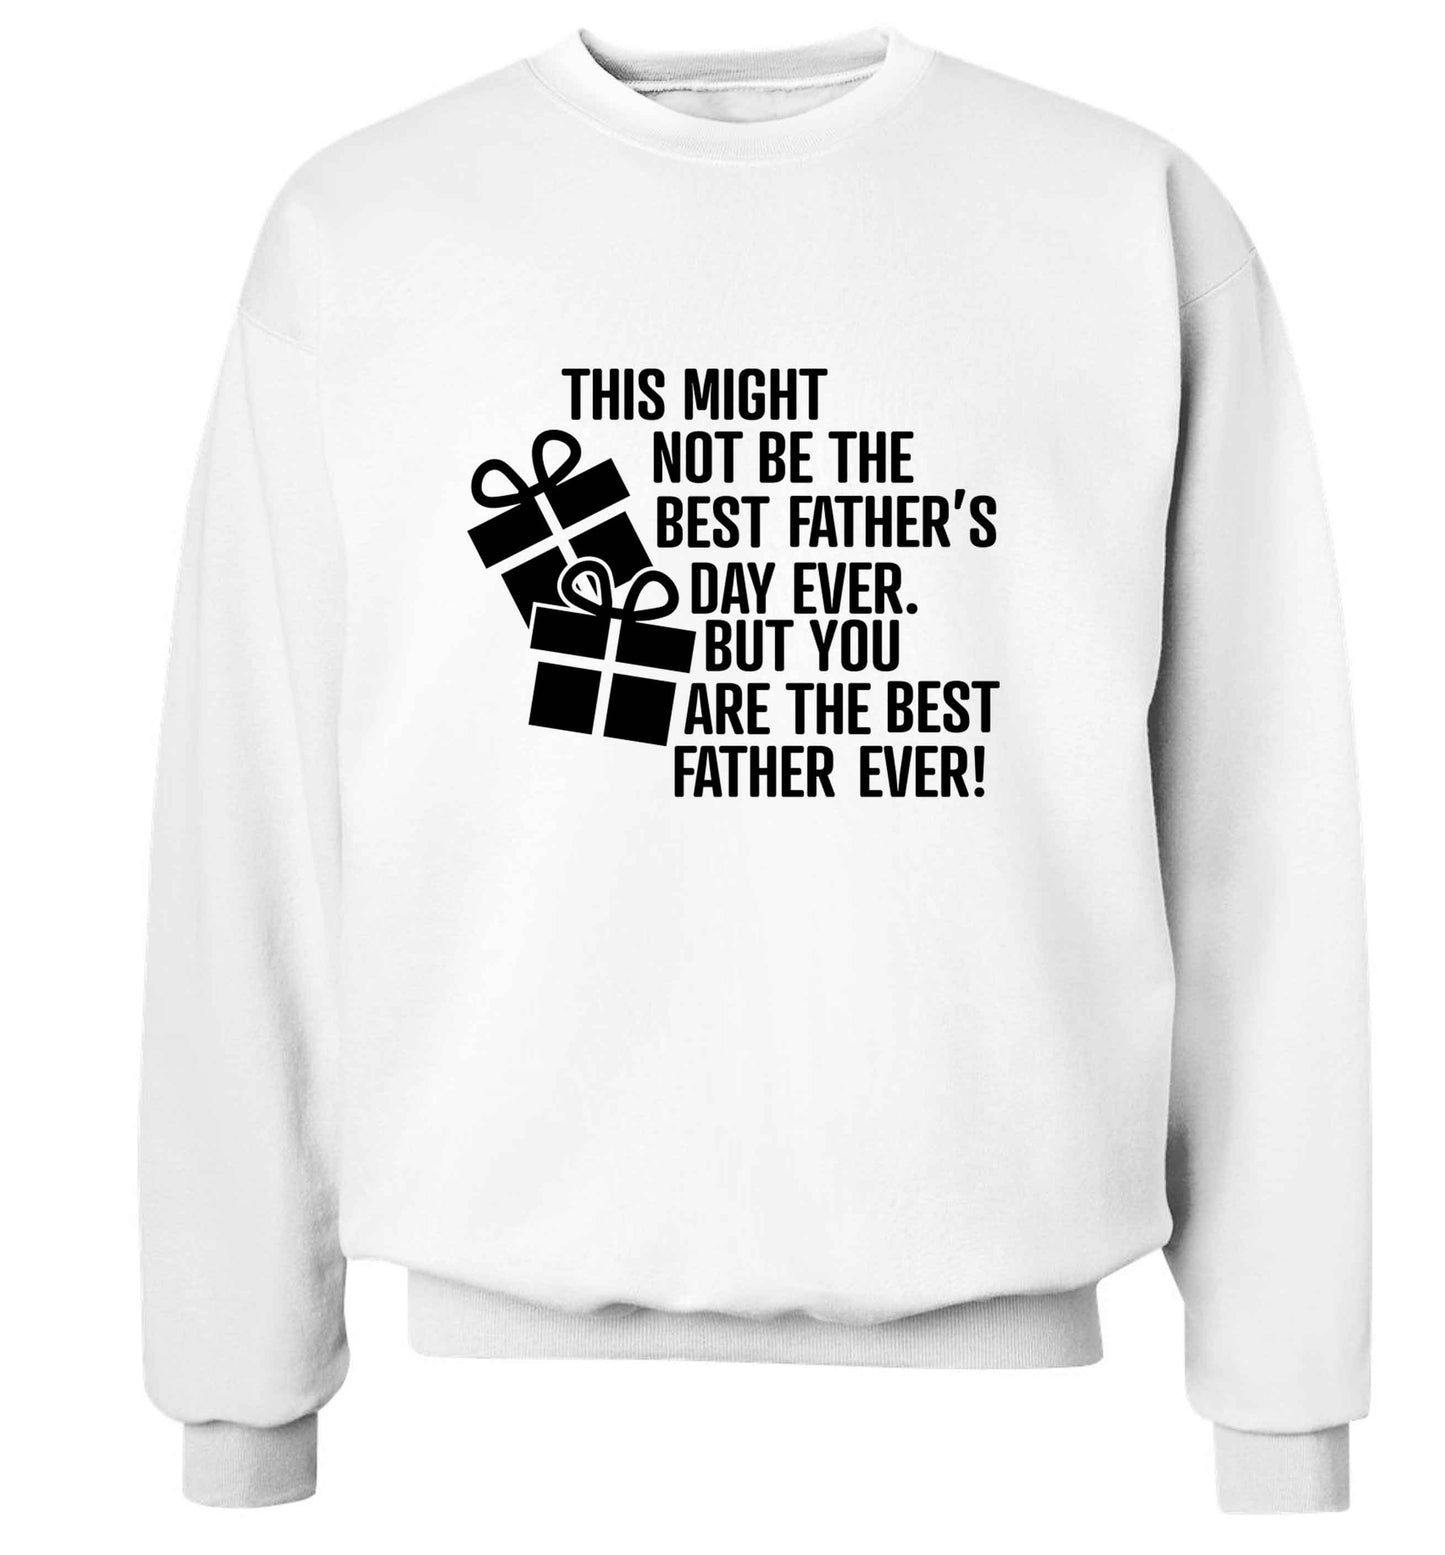 It might not be the best Father's Day ever but you are the best father ever! adult's unisex white sweater 2XL